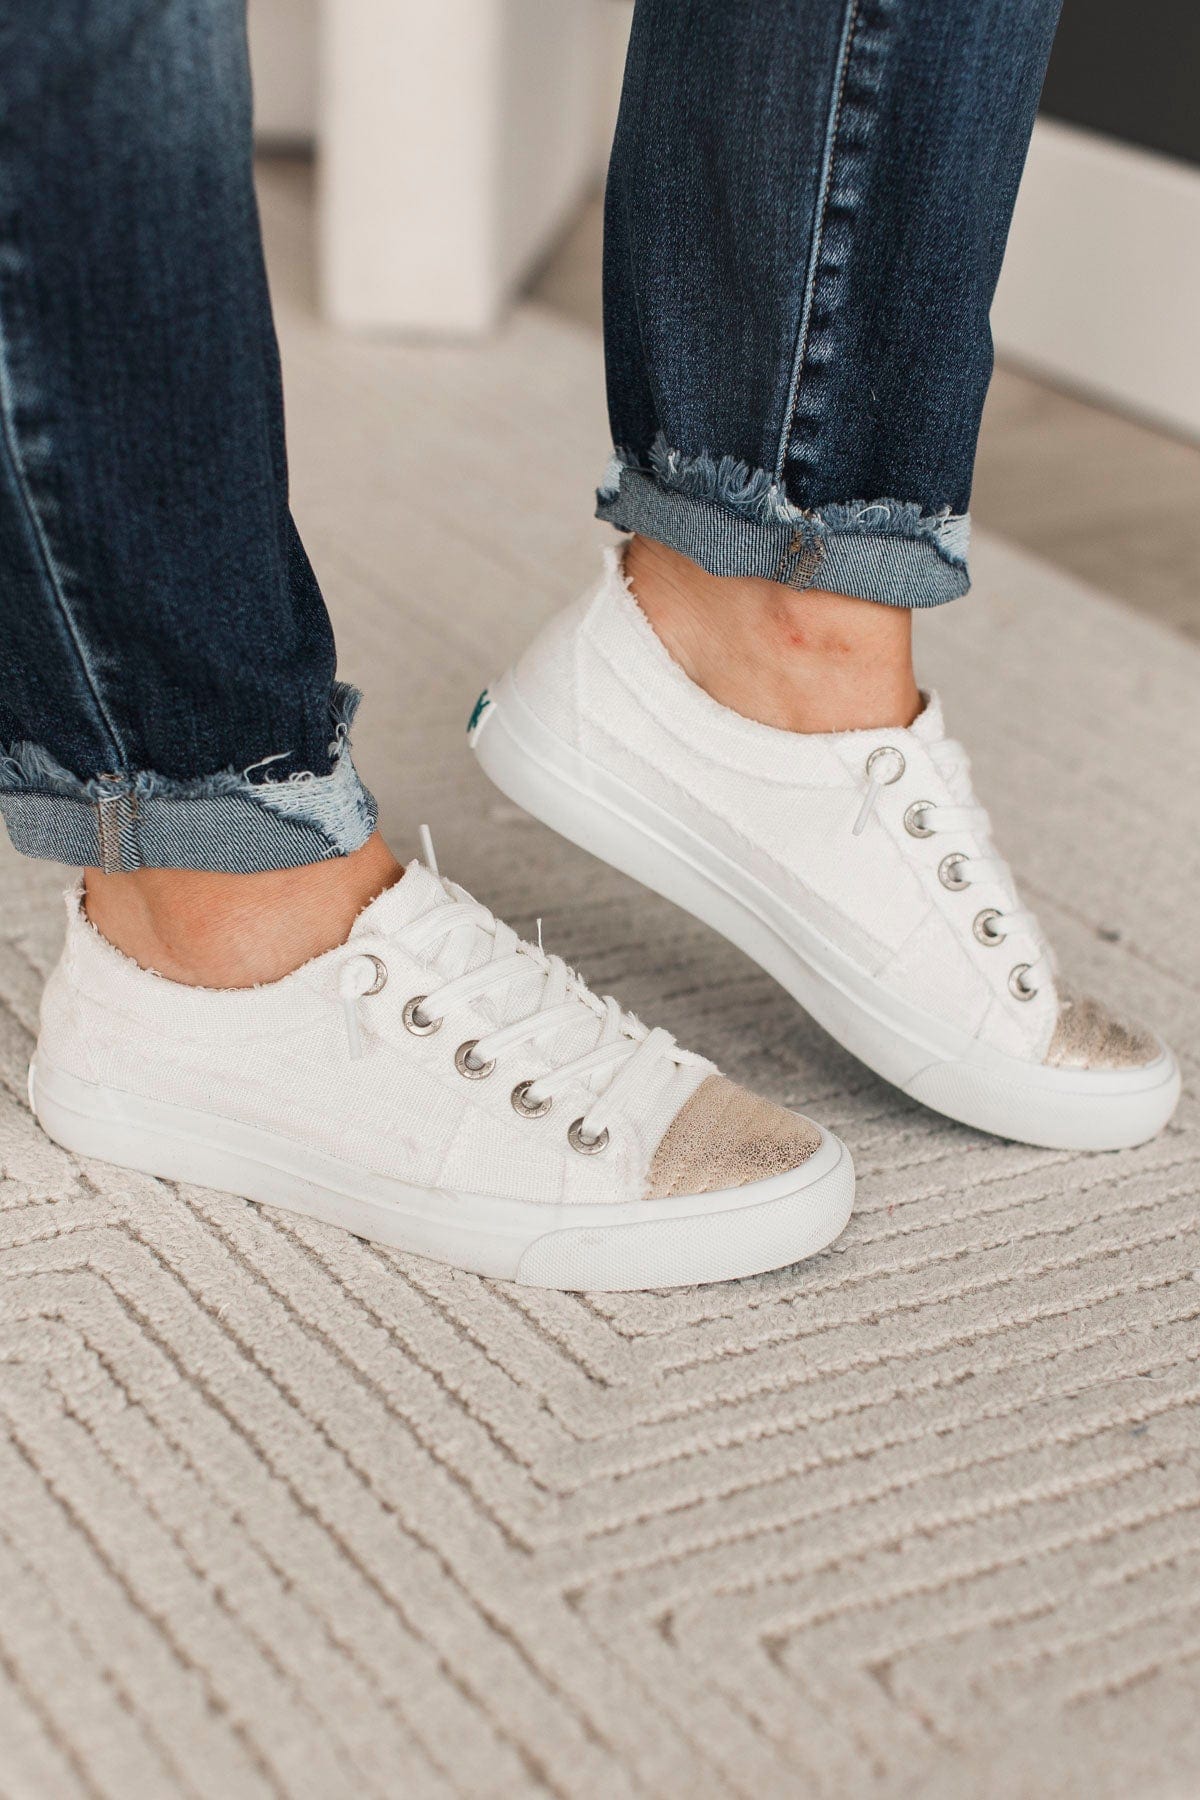 Blowfish Play Shine Sneakers- Off-White Linen